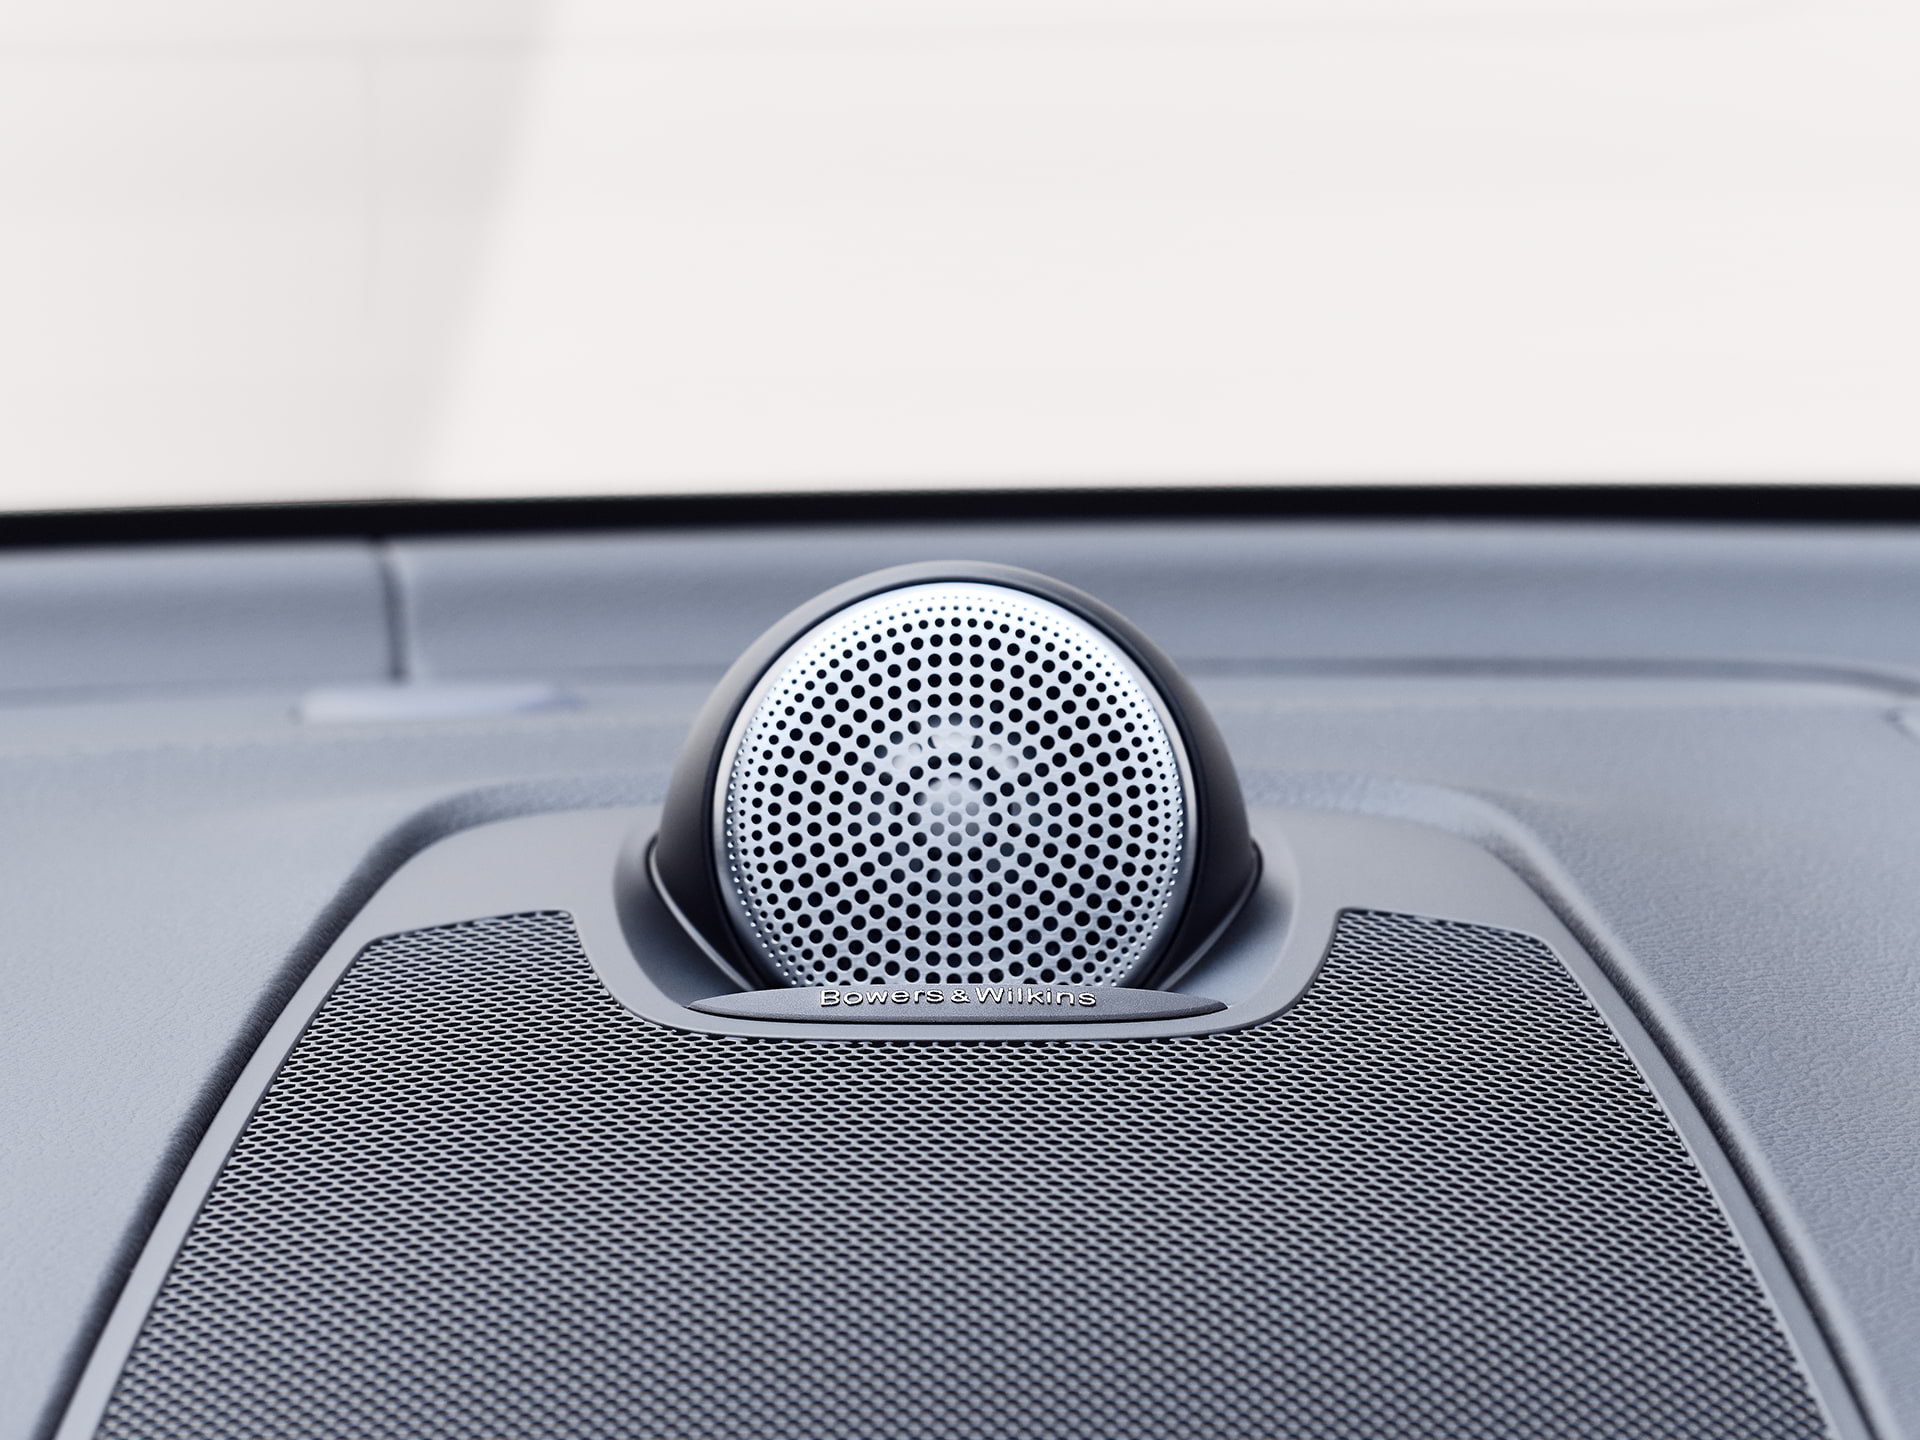 Bowers & Wilkins speakers inside a Volvo XC60 SUV.